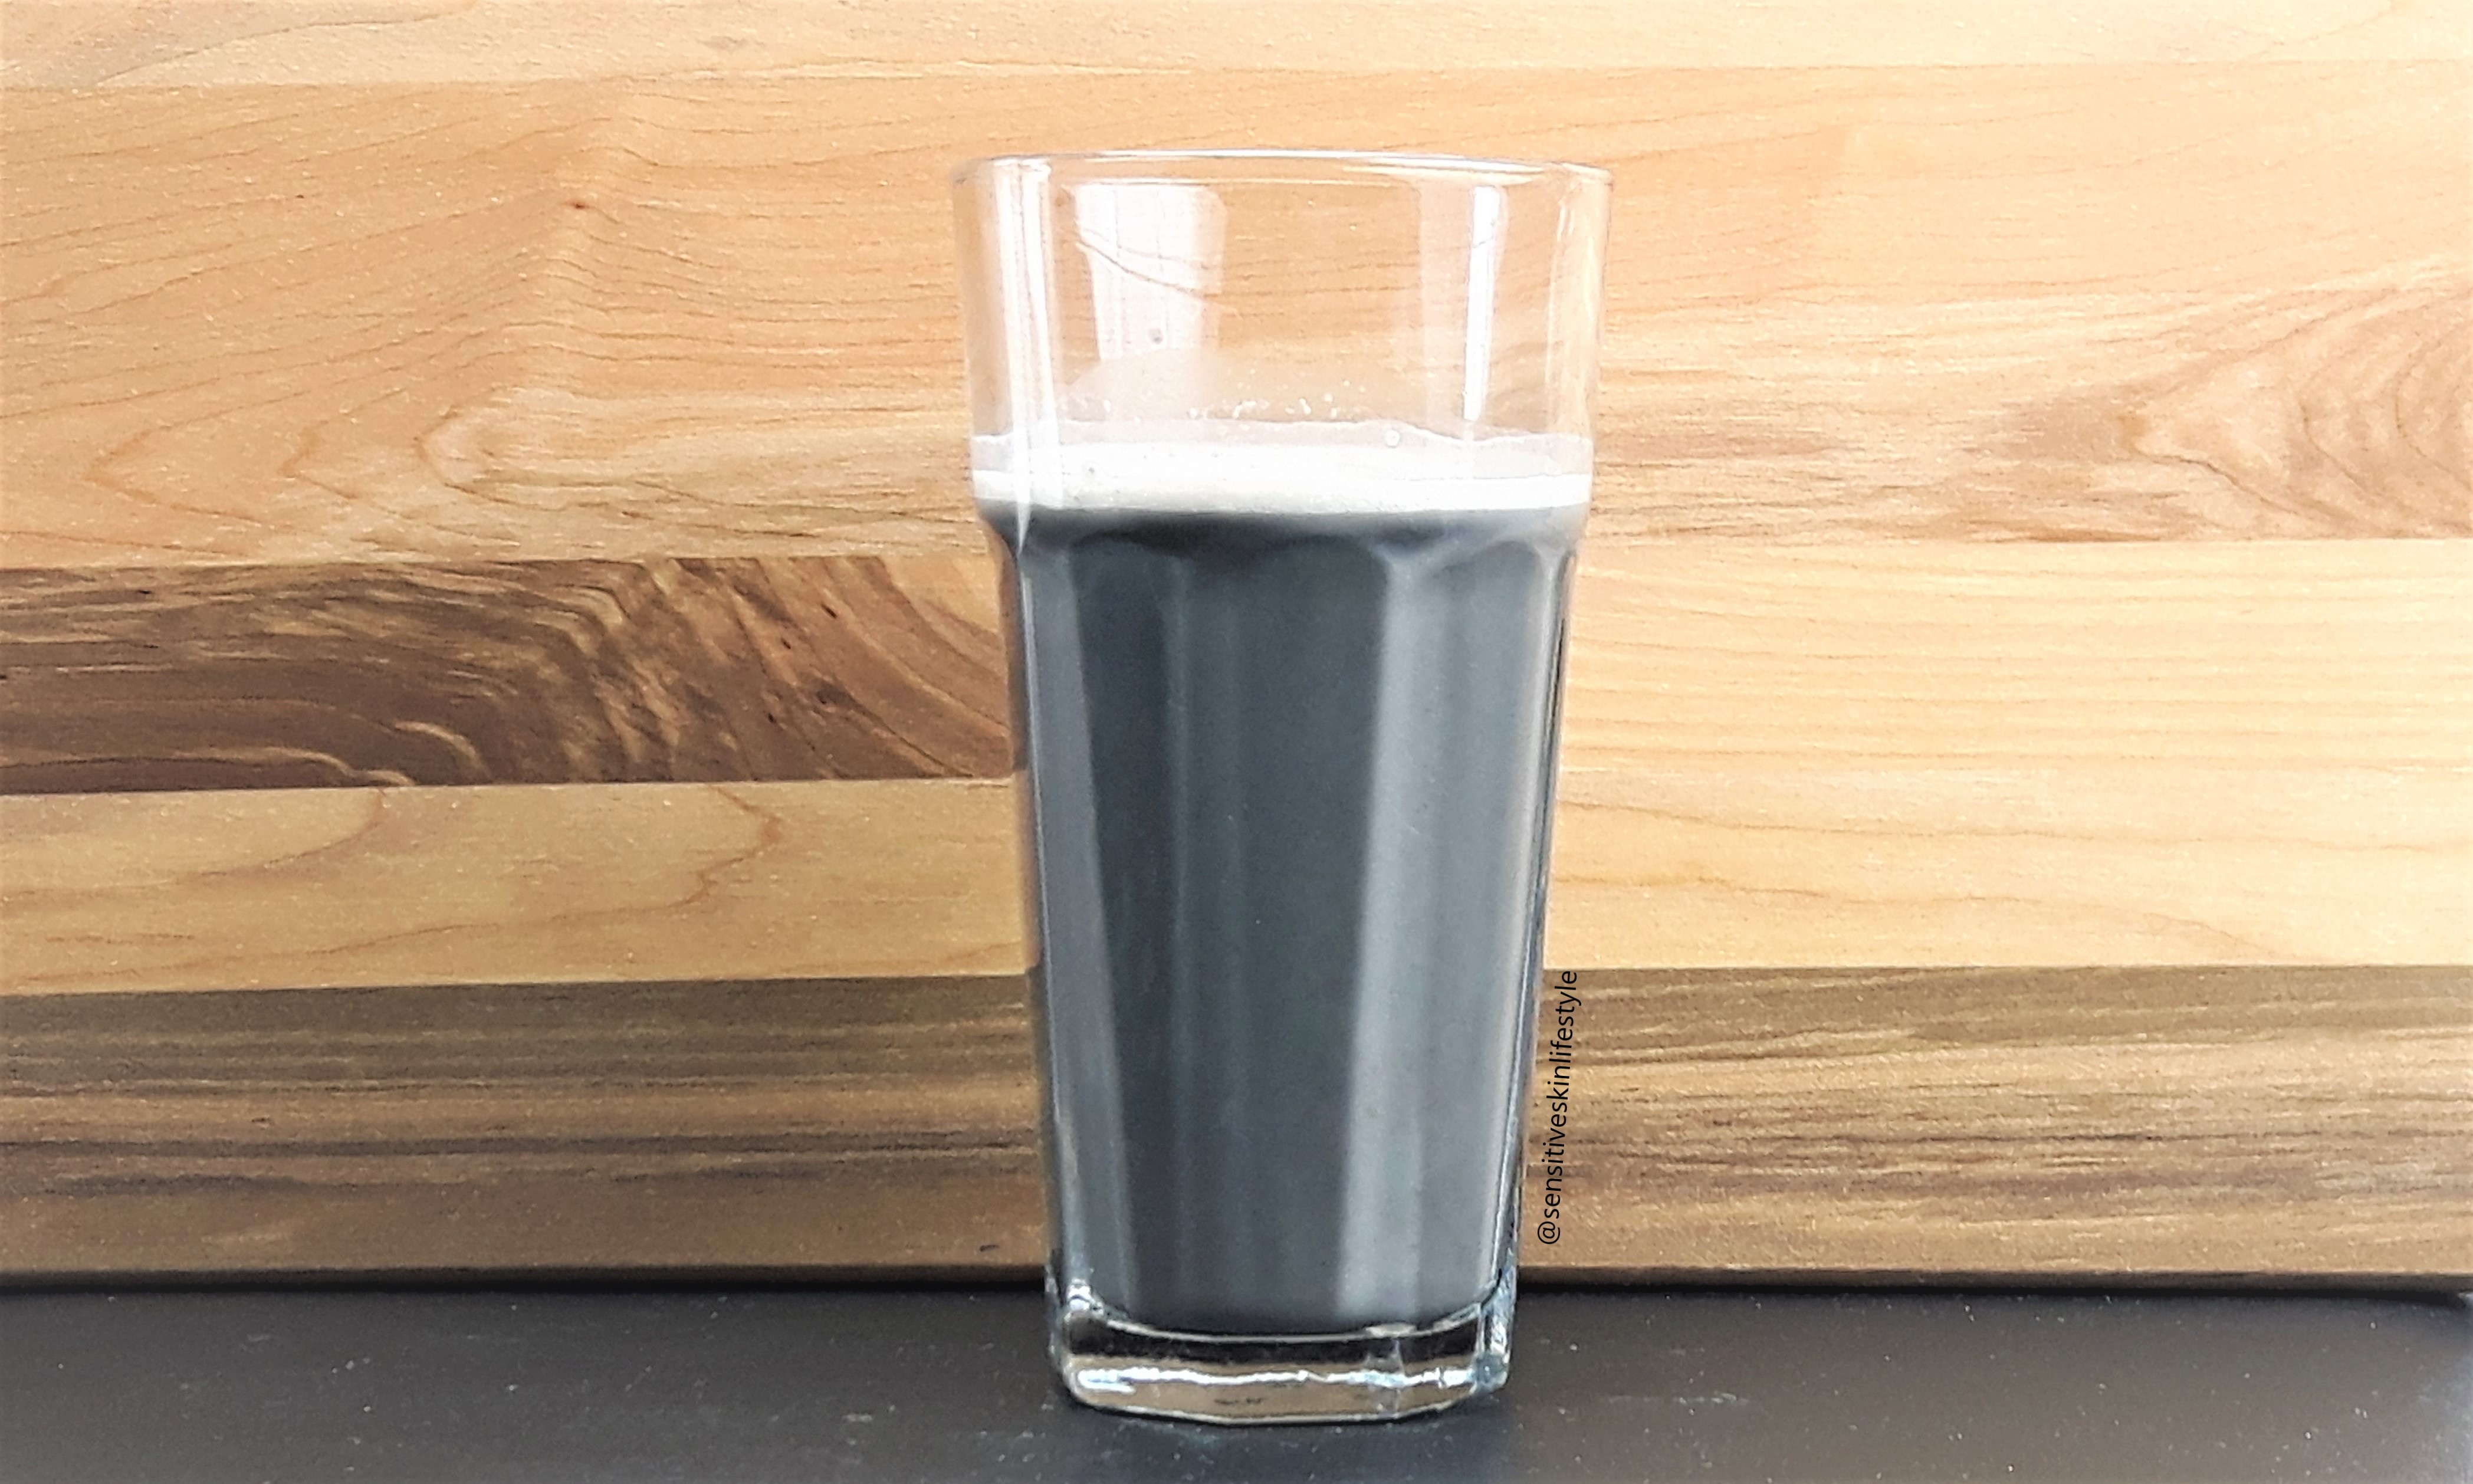 Photo of a glass of Roasted Black Sesame Mylk made by Catherine using this recipe